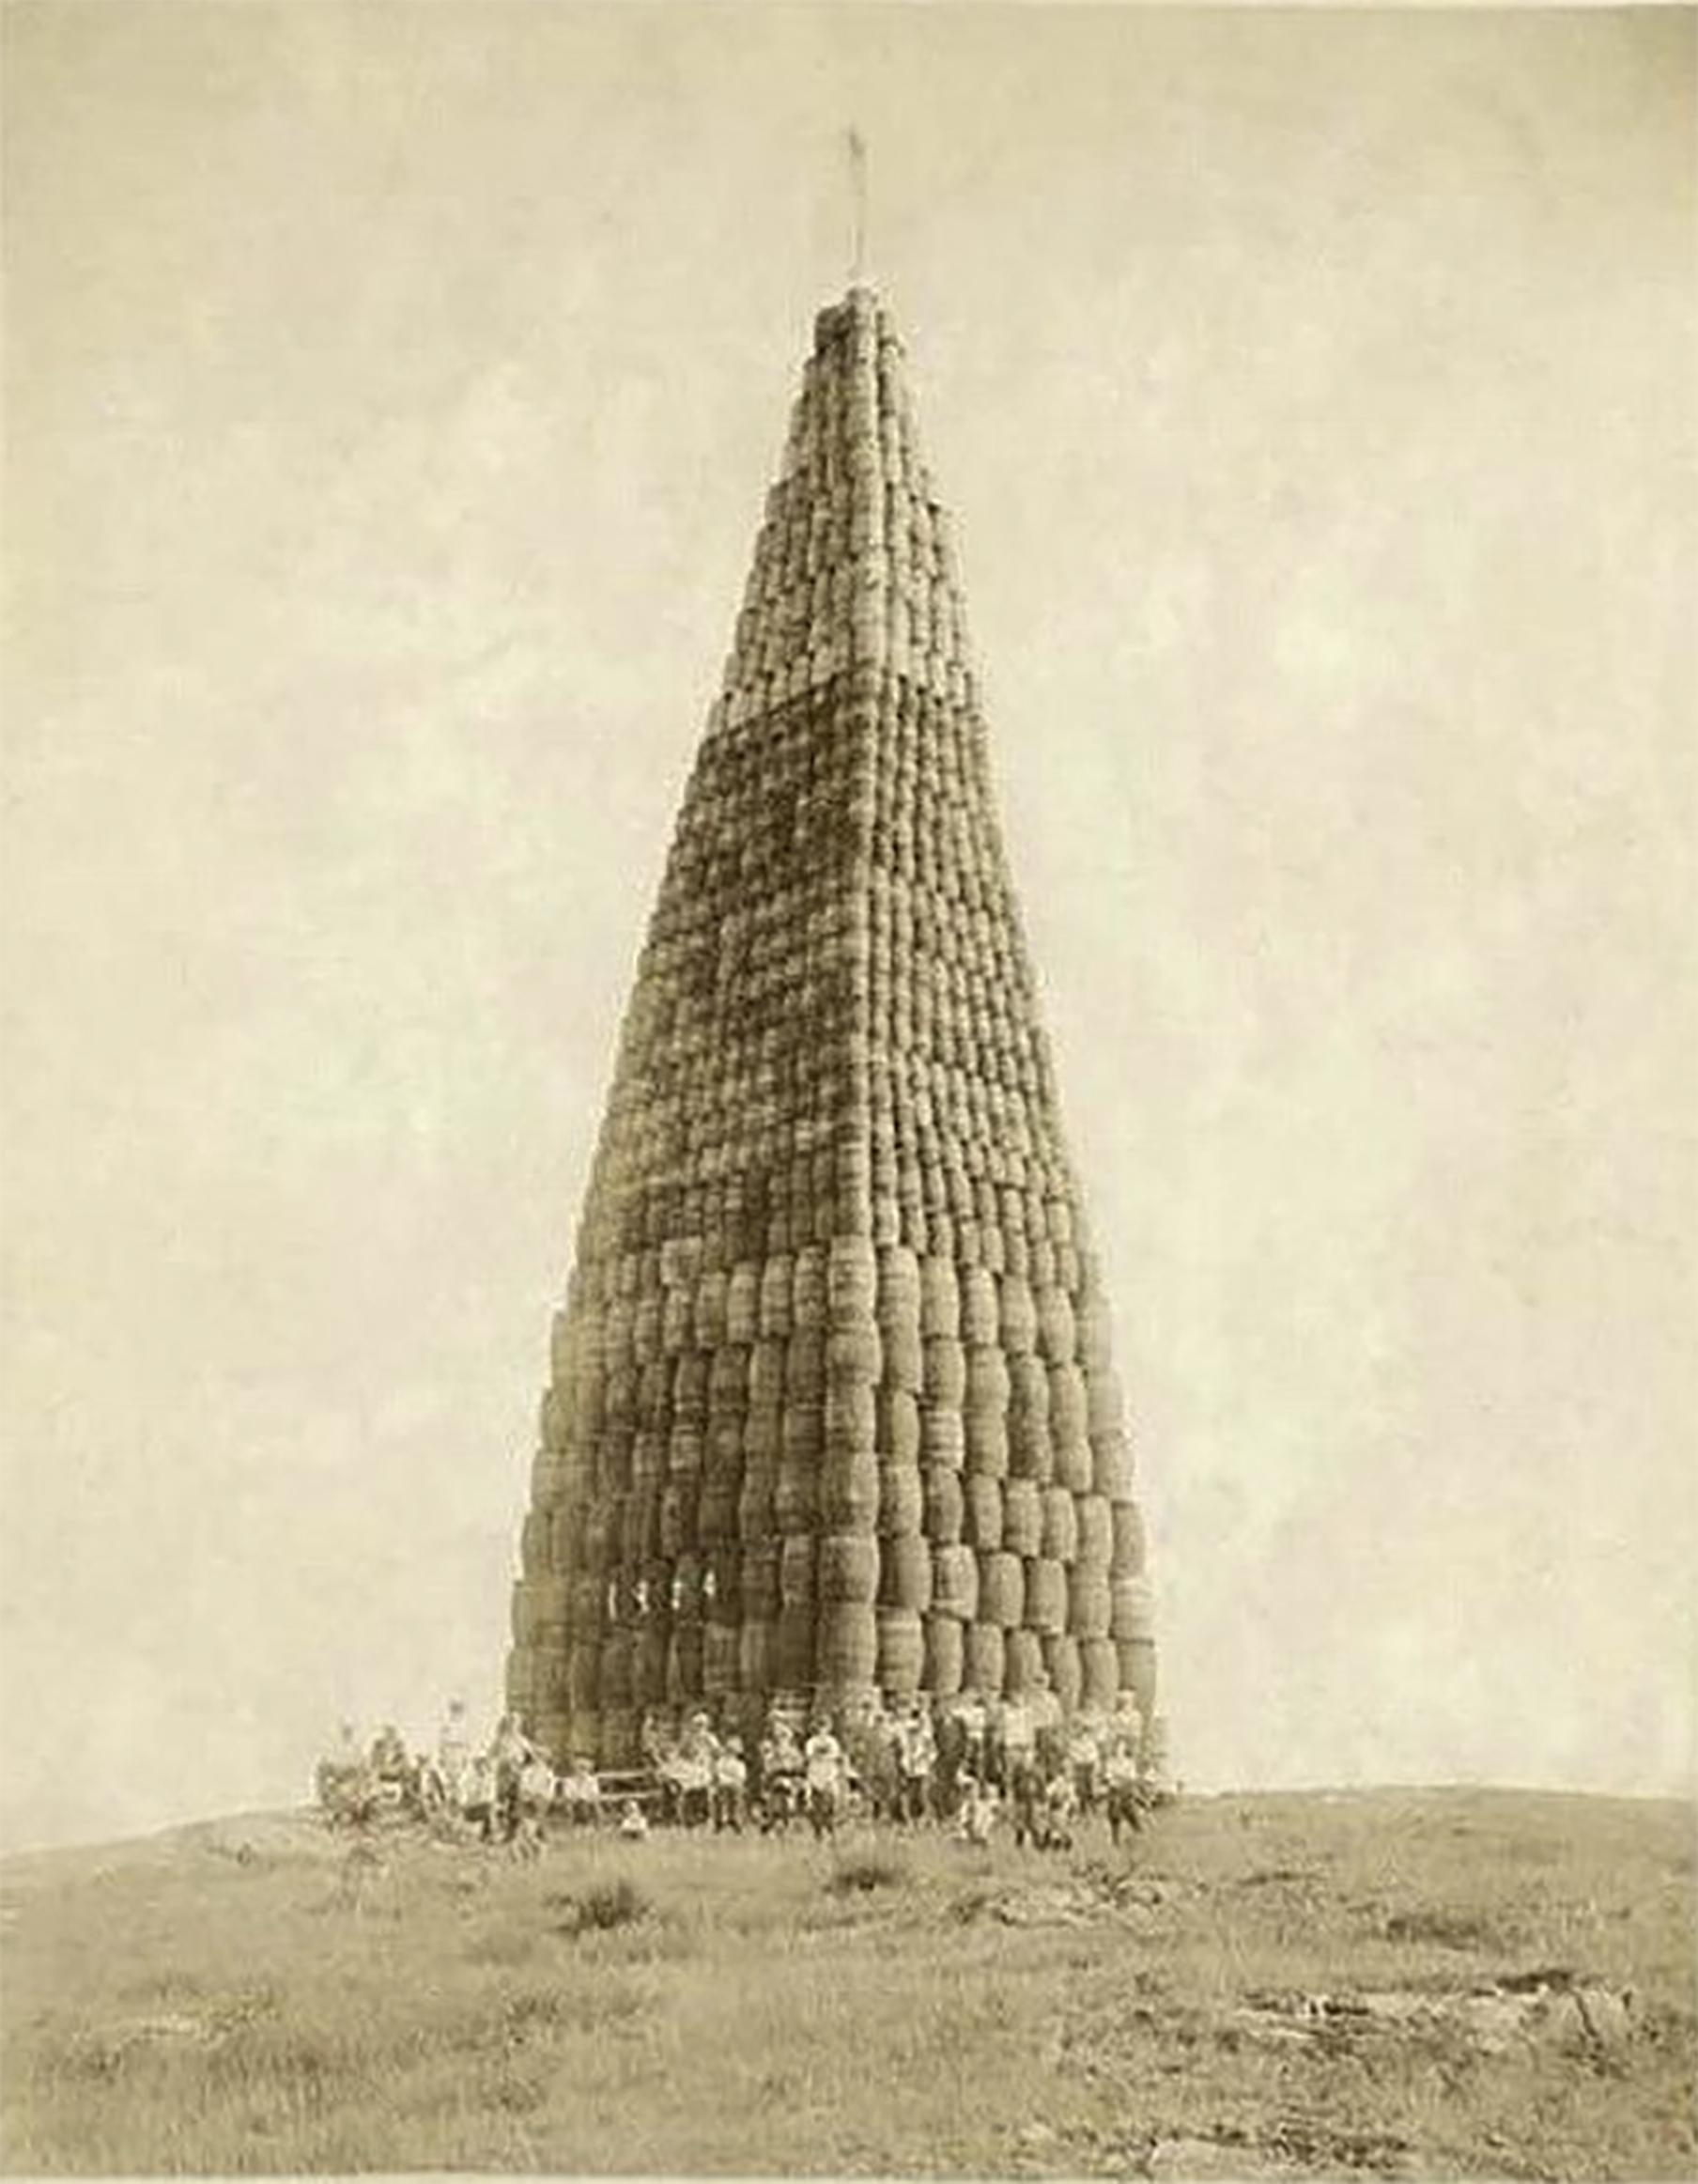 Liquor barrels stacked and ready to be burned during the prohibitionary times.